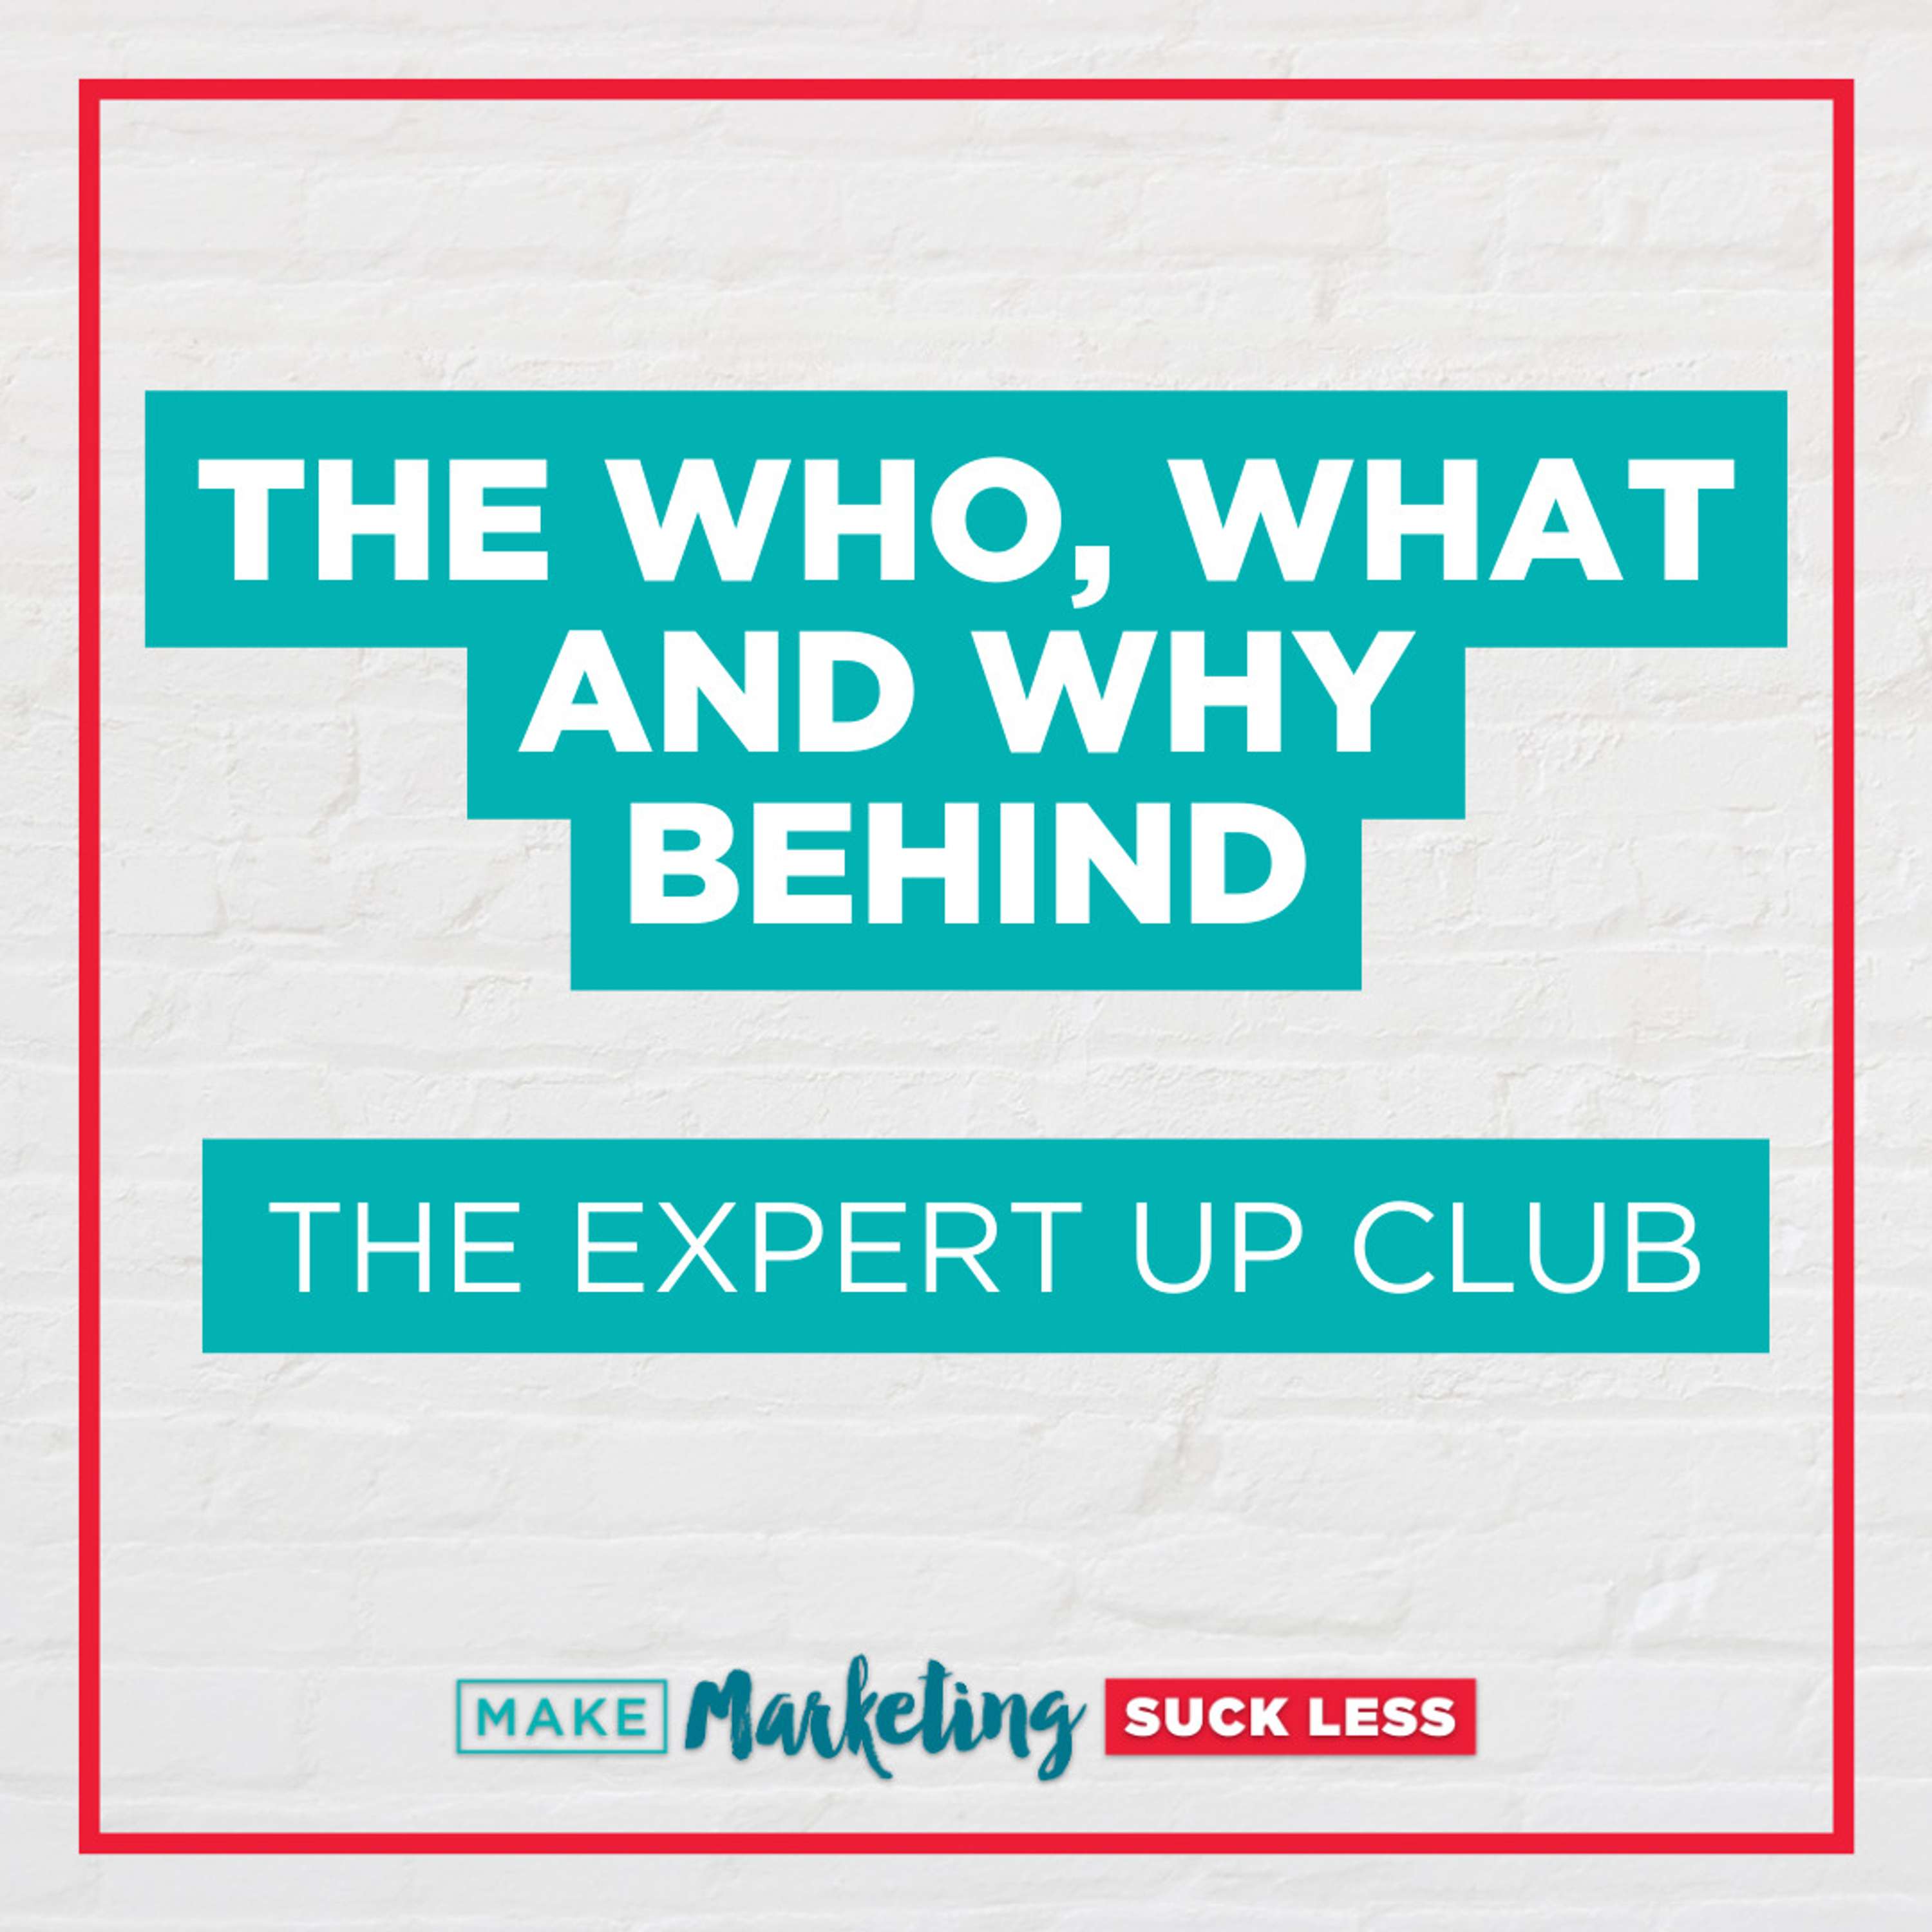 The Who, What, and Why Behind The Expert Up Club